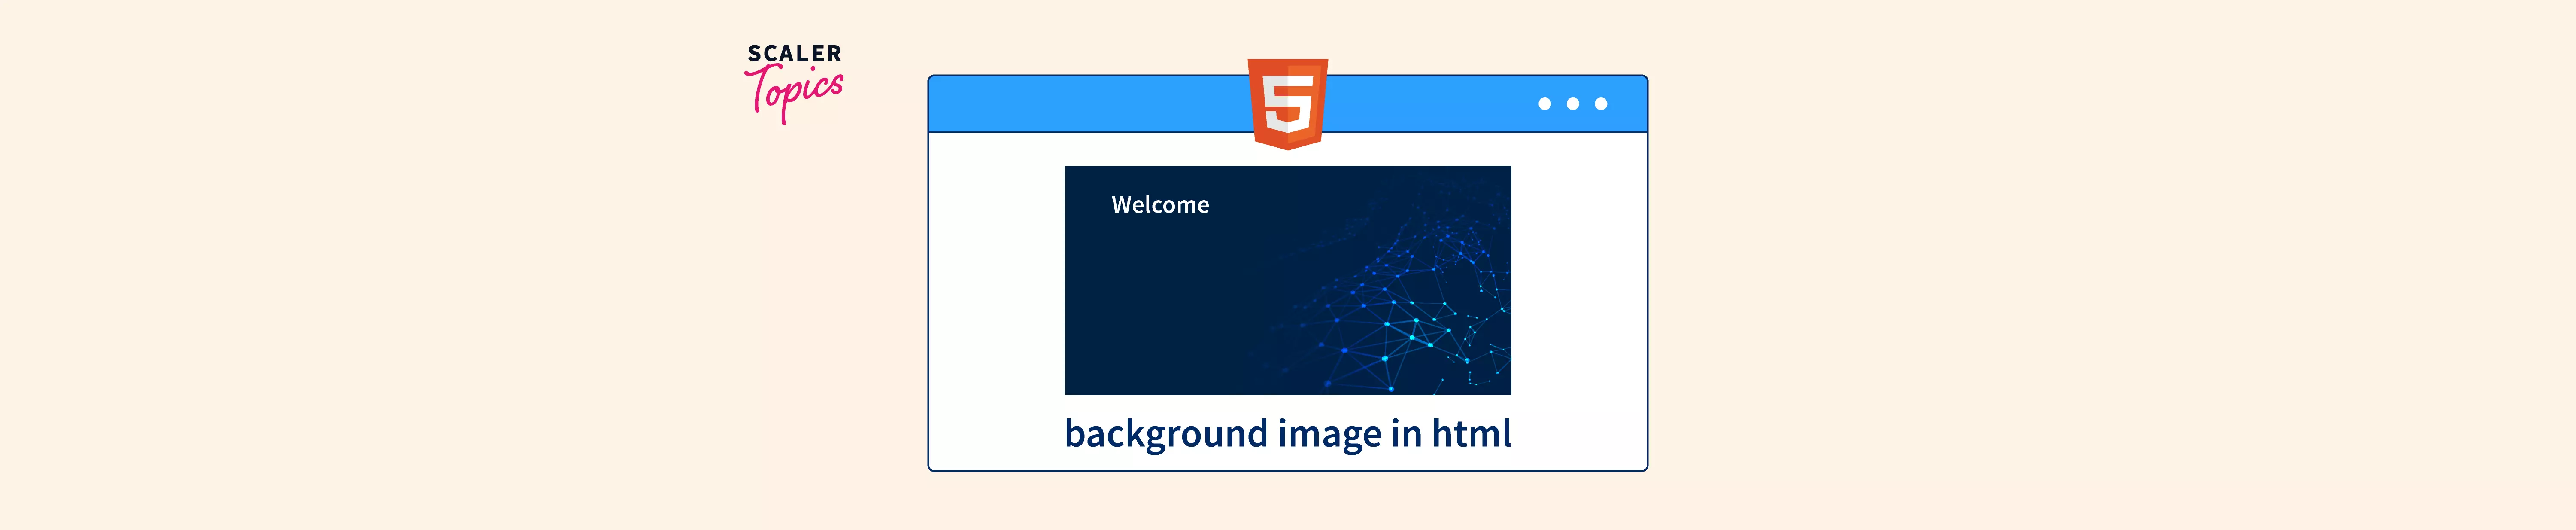 How To Insert A Background Image In HTML?